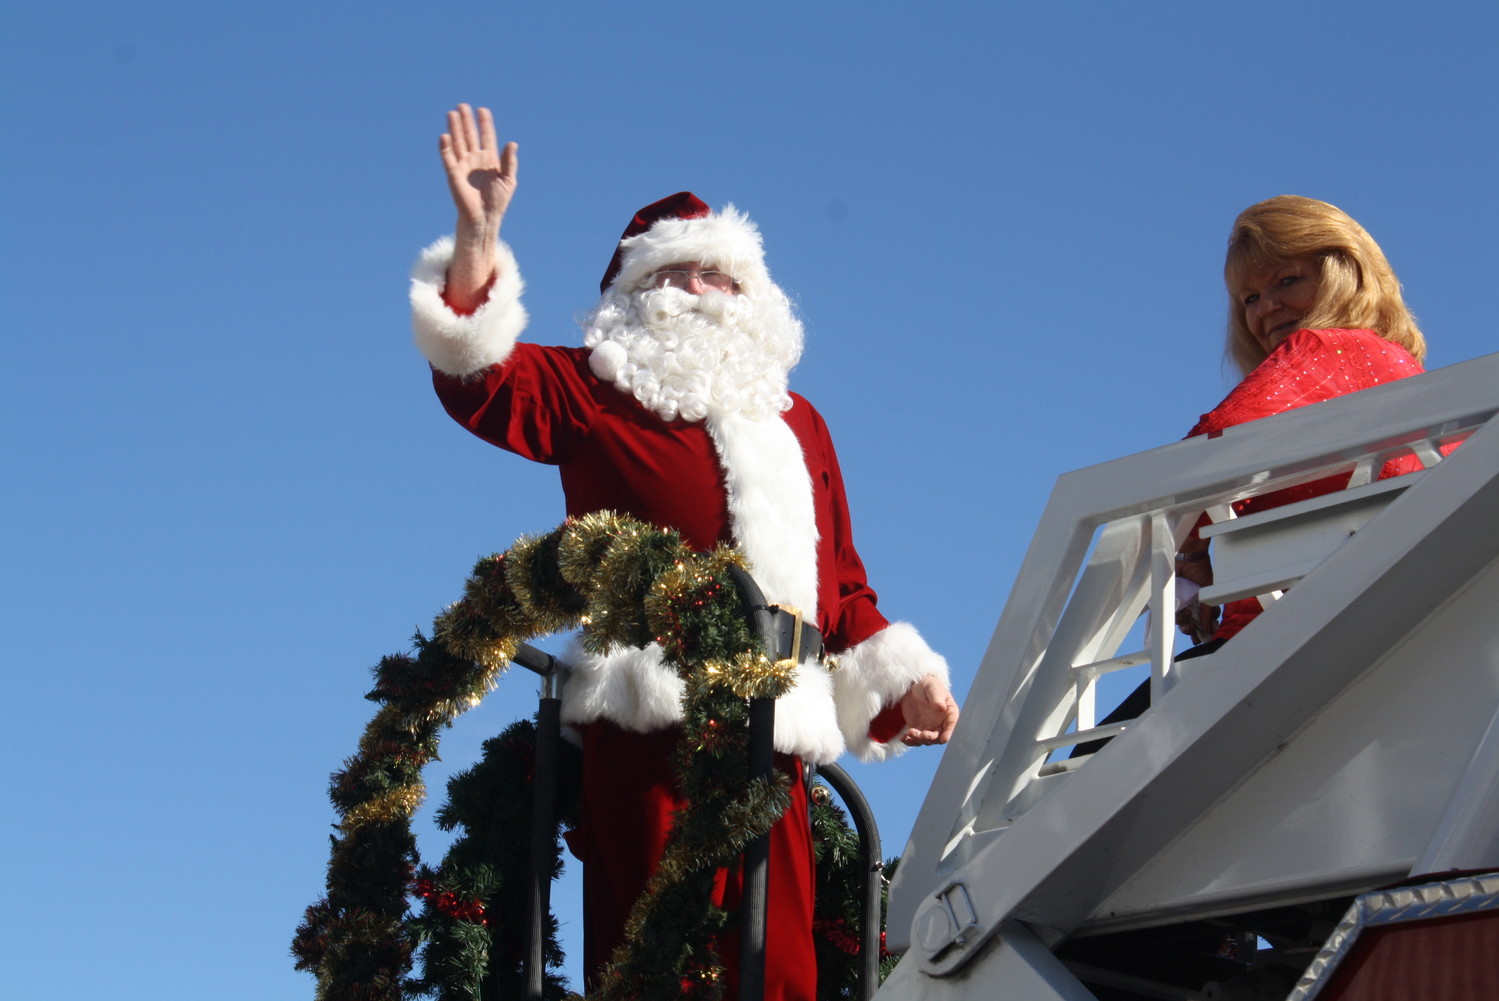 Santa Claus greets parade attendees as the last attraction of the annual holiday event.